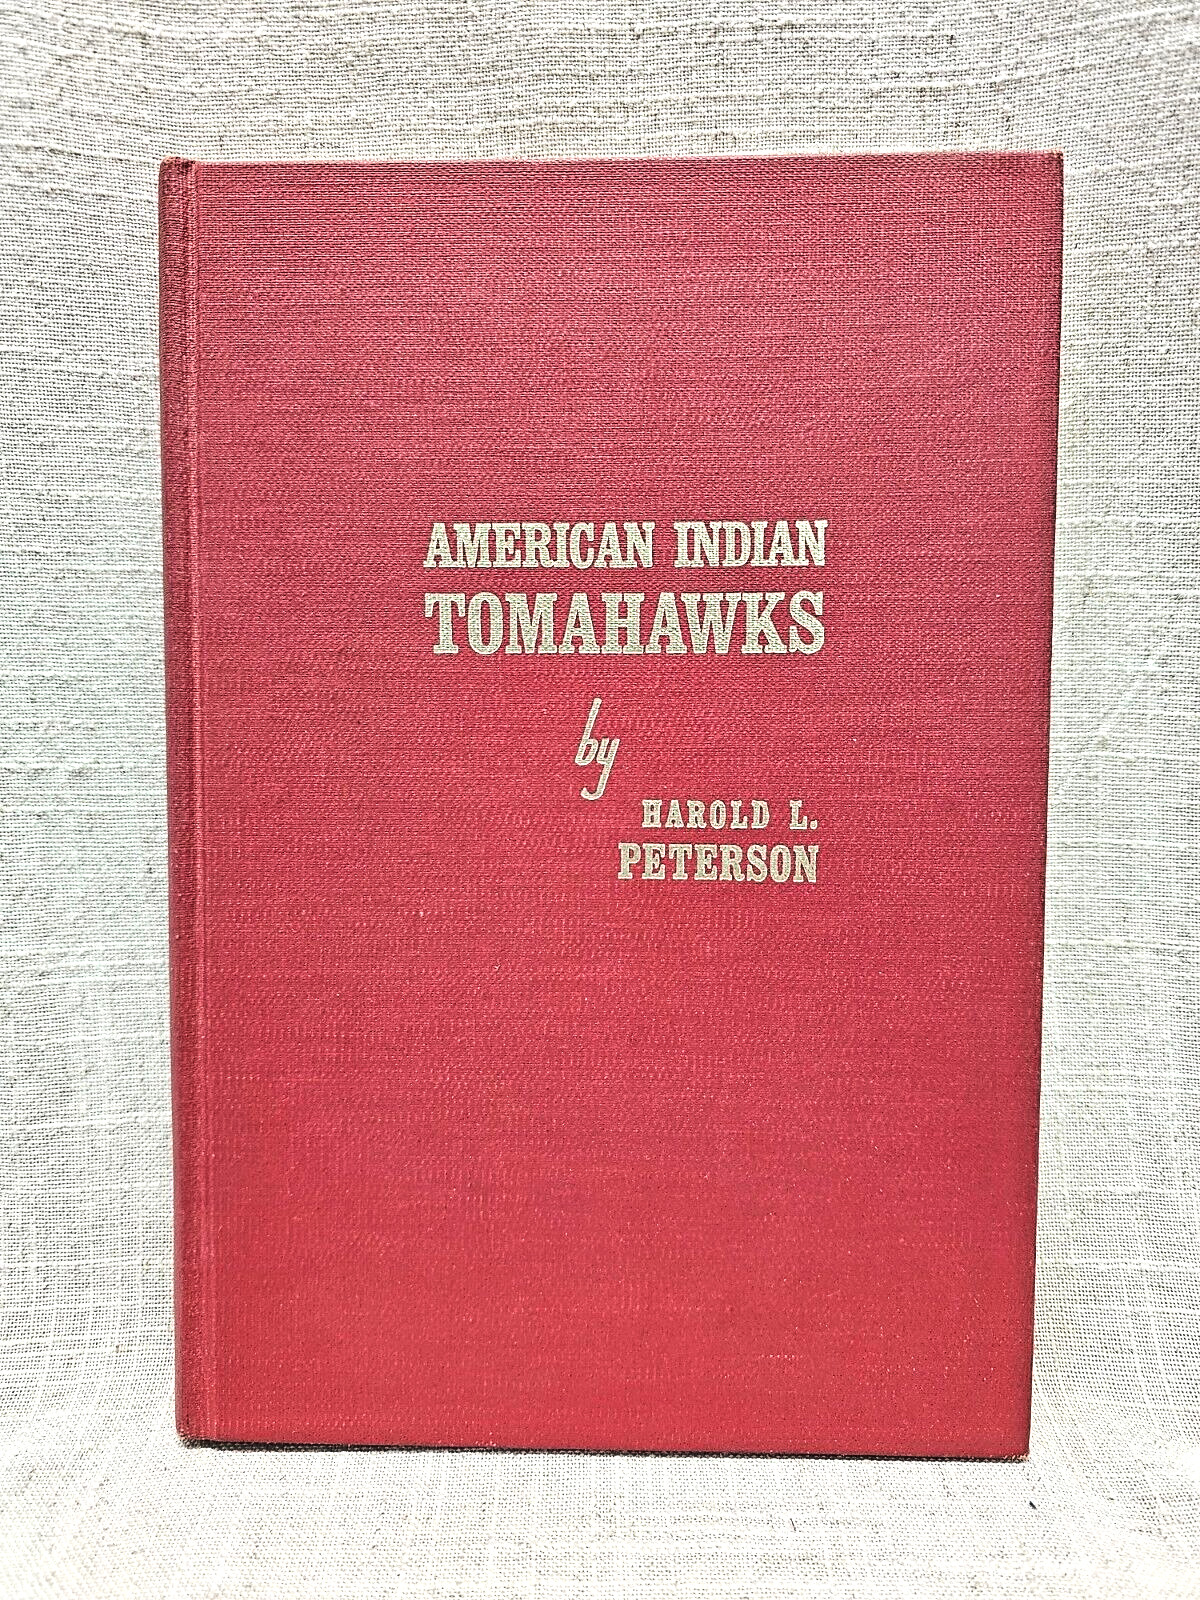 VTG 1971 Book American Indian Tomahawks Harold L. Peterson Charity HC DS36